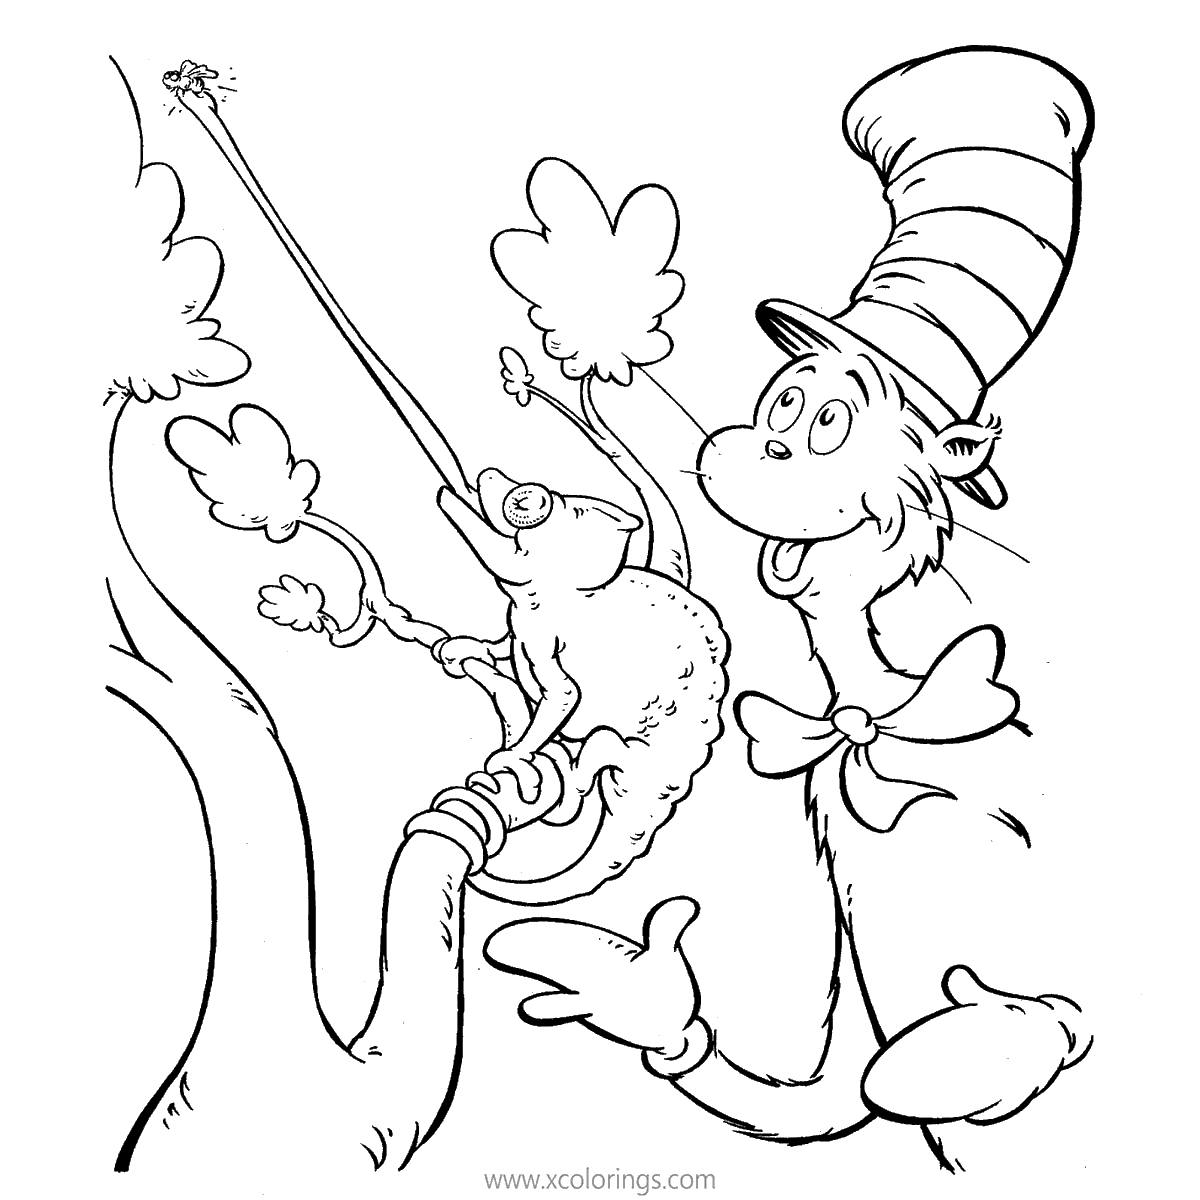 Free Cat In The Hat Coloring Pages Lizard printable